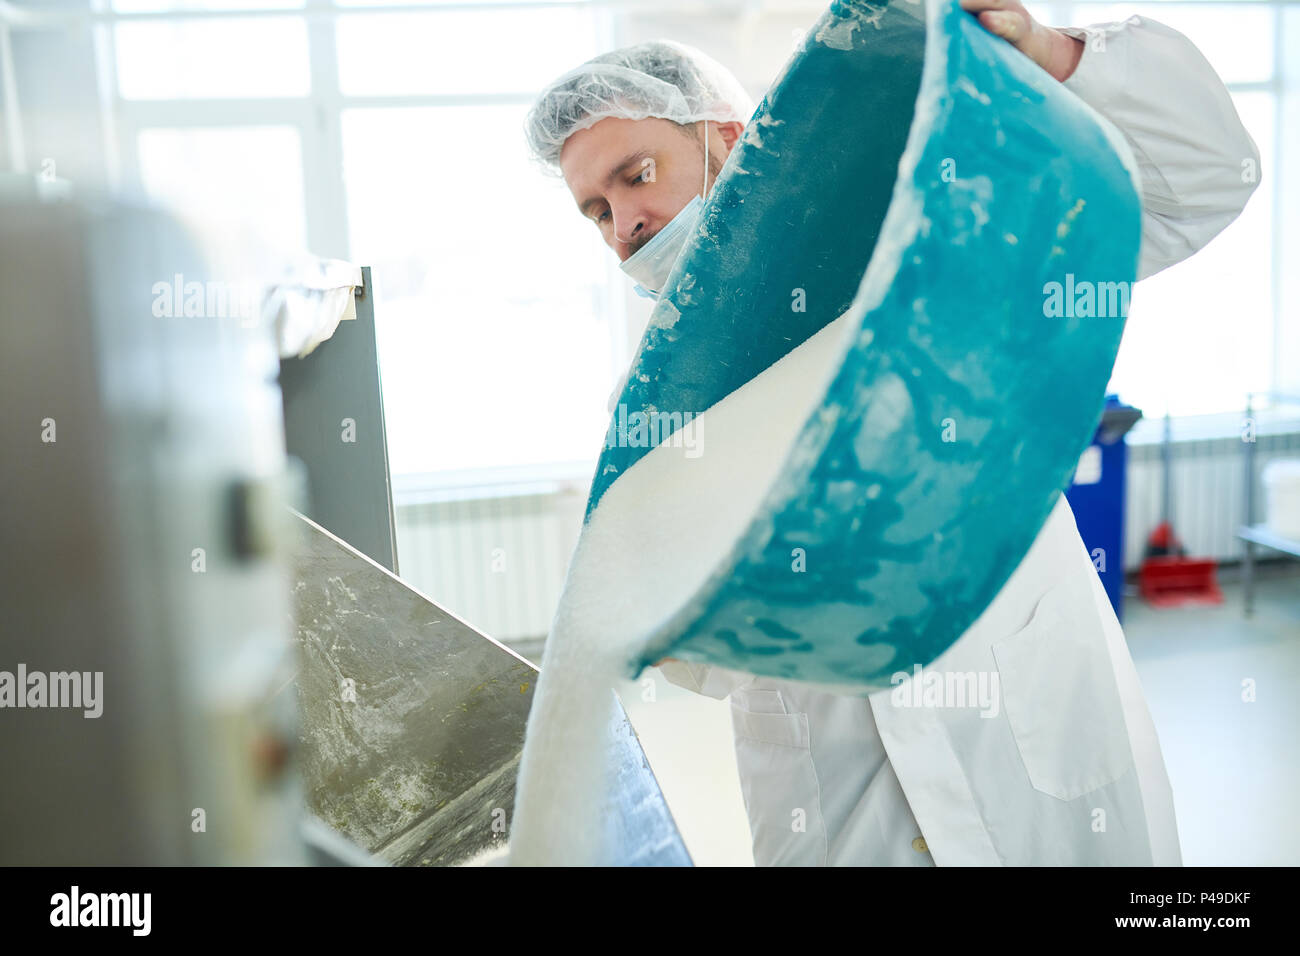 Confectioner poured out sugar in vat Stock Photo